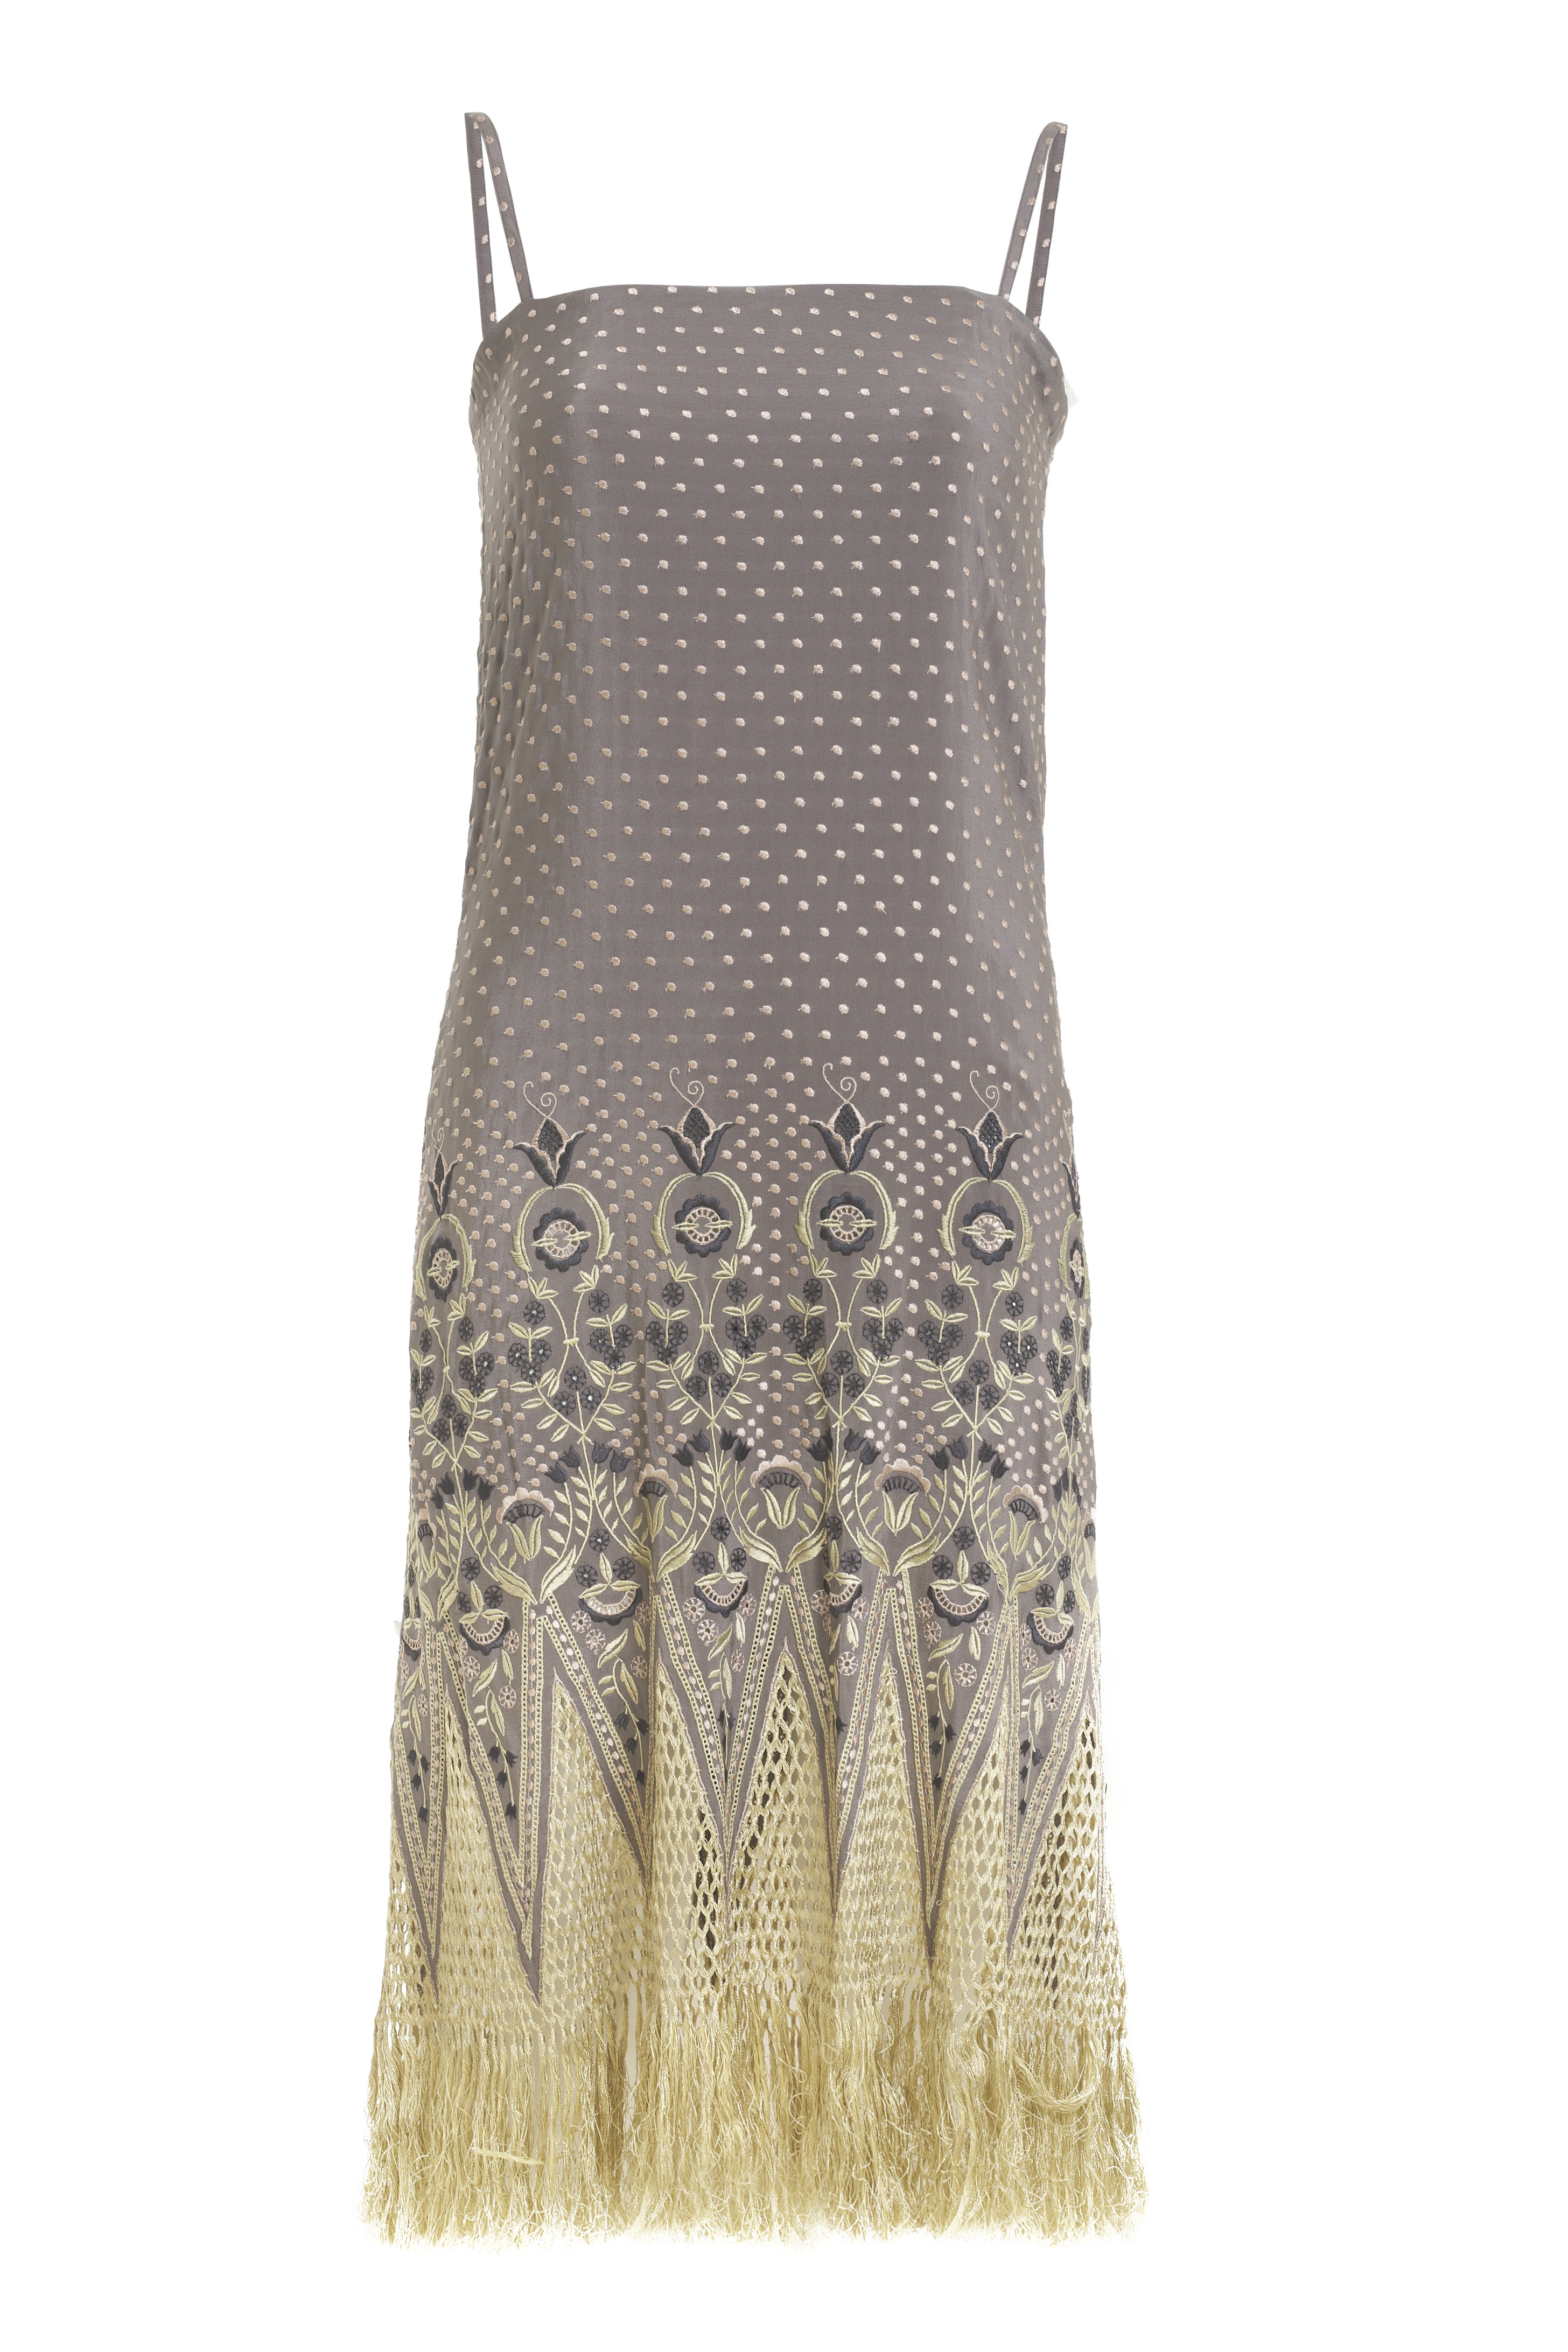 Chloe purple summer dress with pink and gold embroidery and gold ...